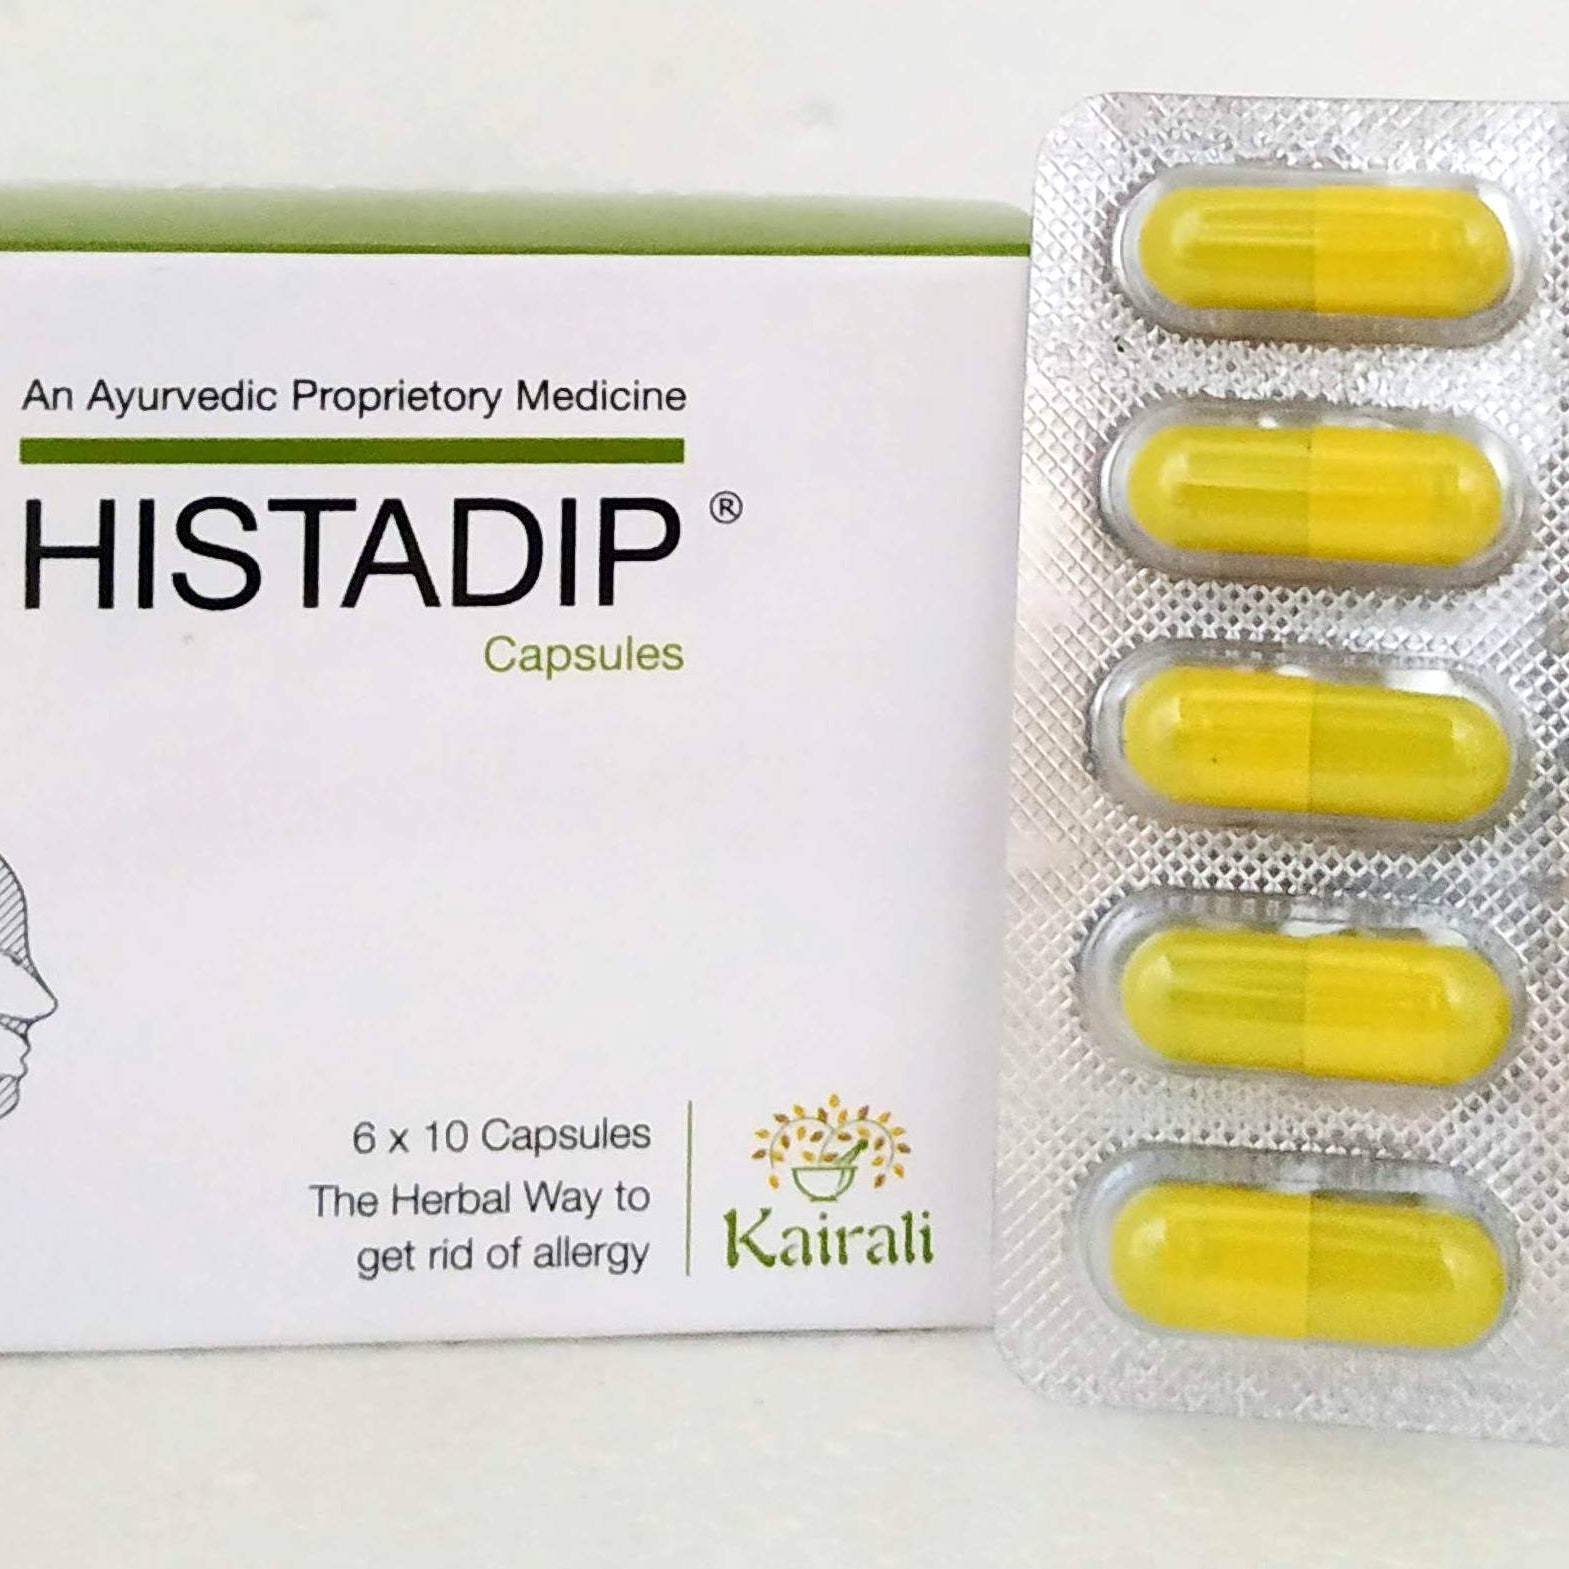 Shop Histadip capsules - 10Capsules at price 25.00 from Kairali Online - Ayush Care